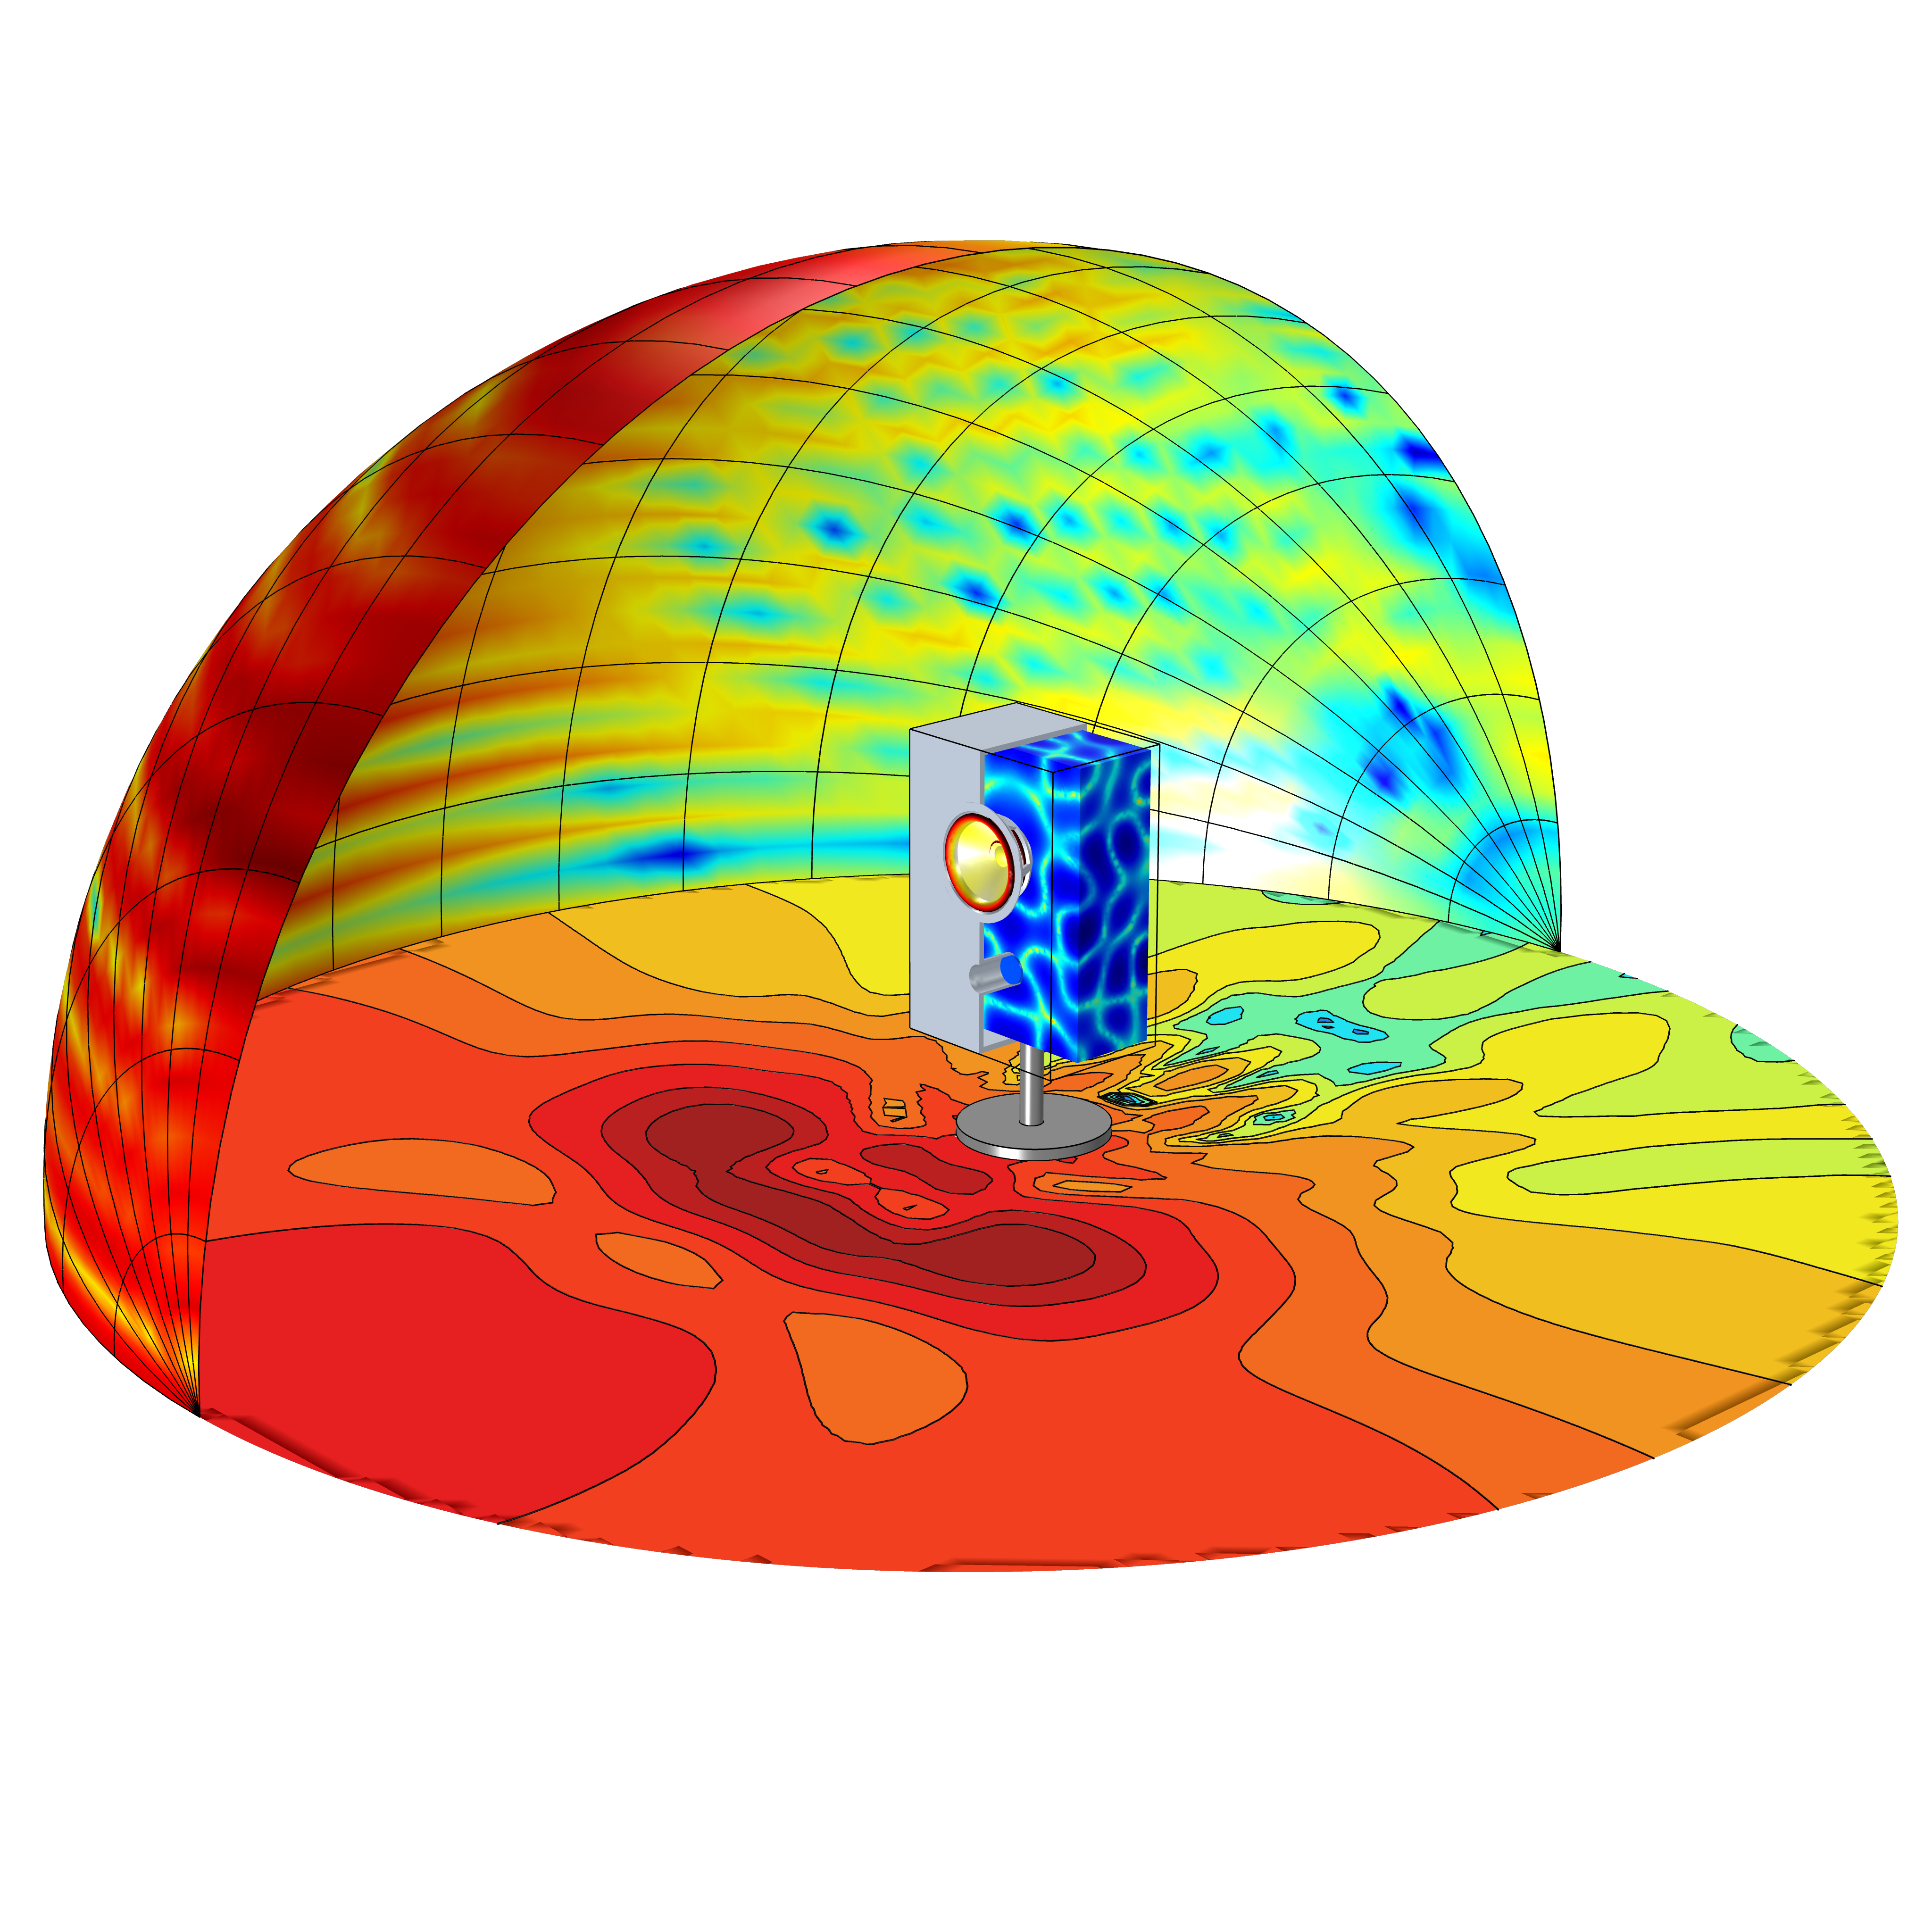 A speaker model showing the interior and exterior sound pressure level in the Rainbow color table.